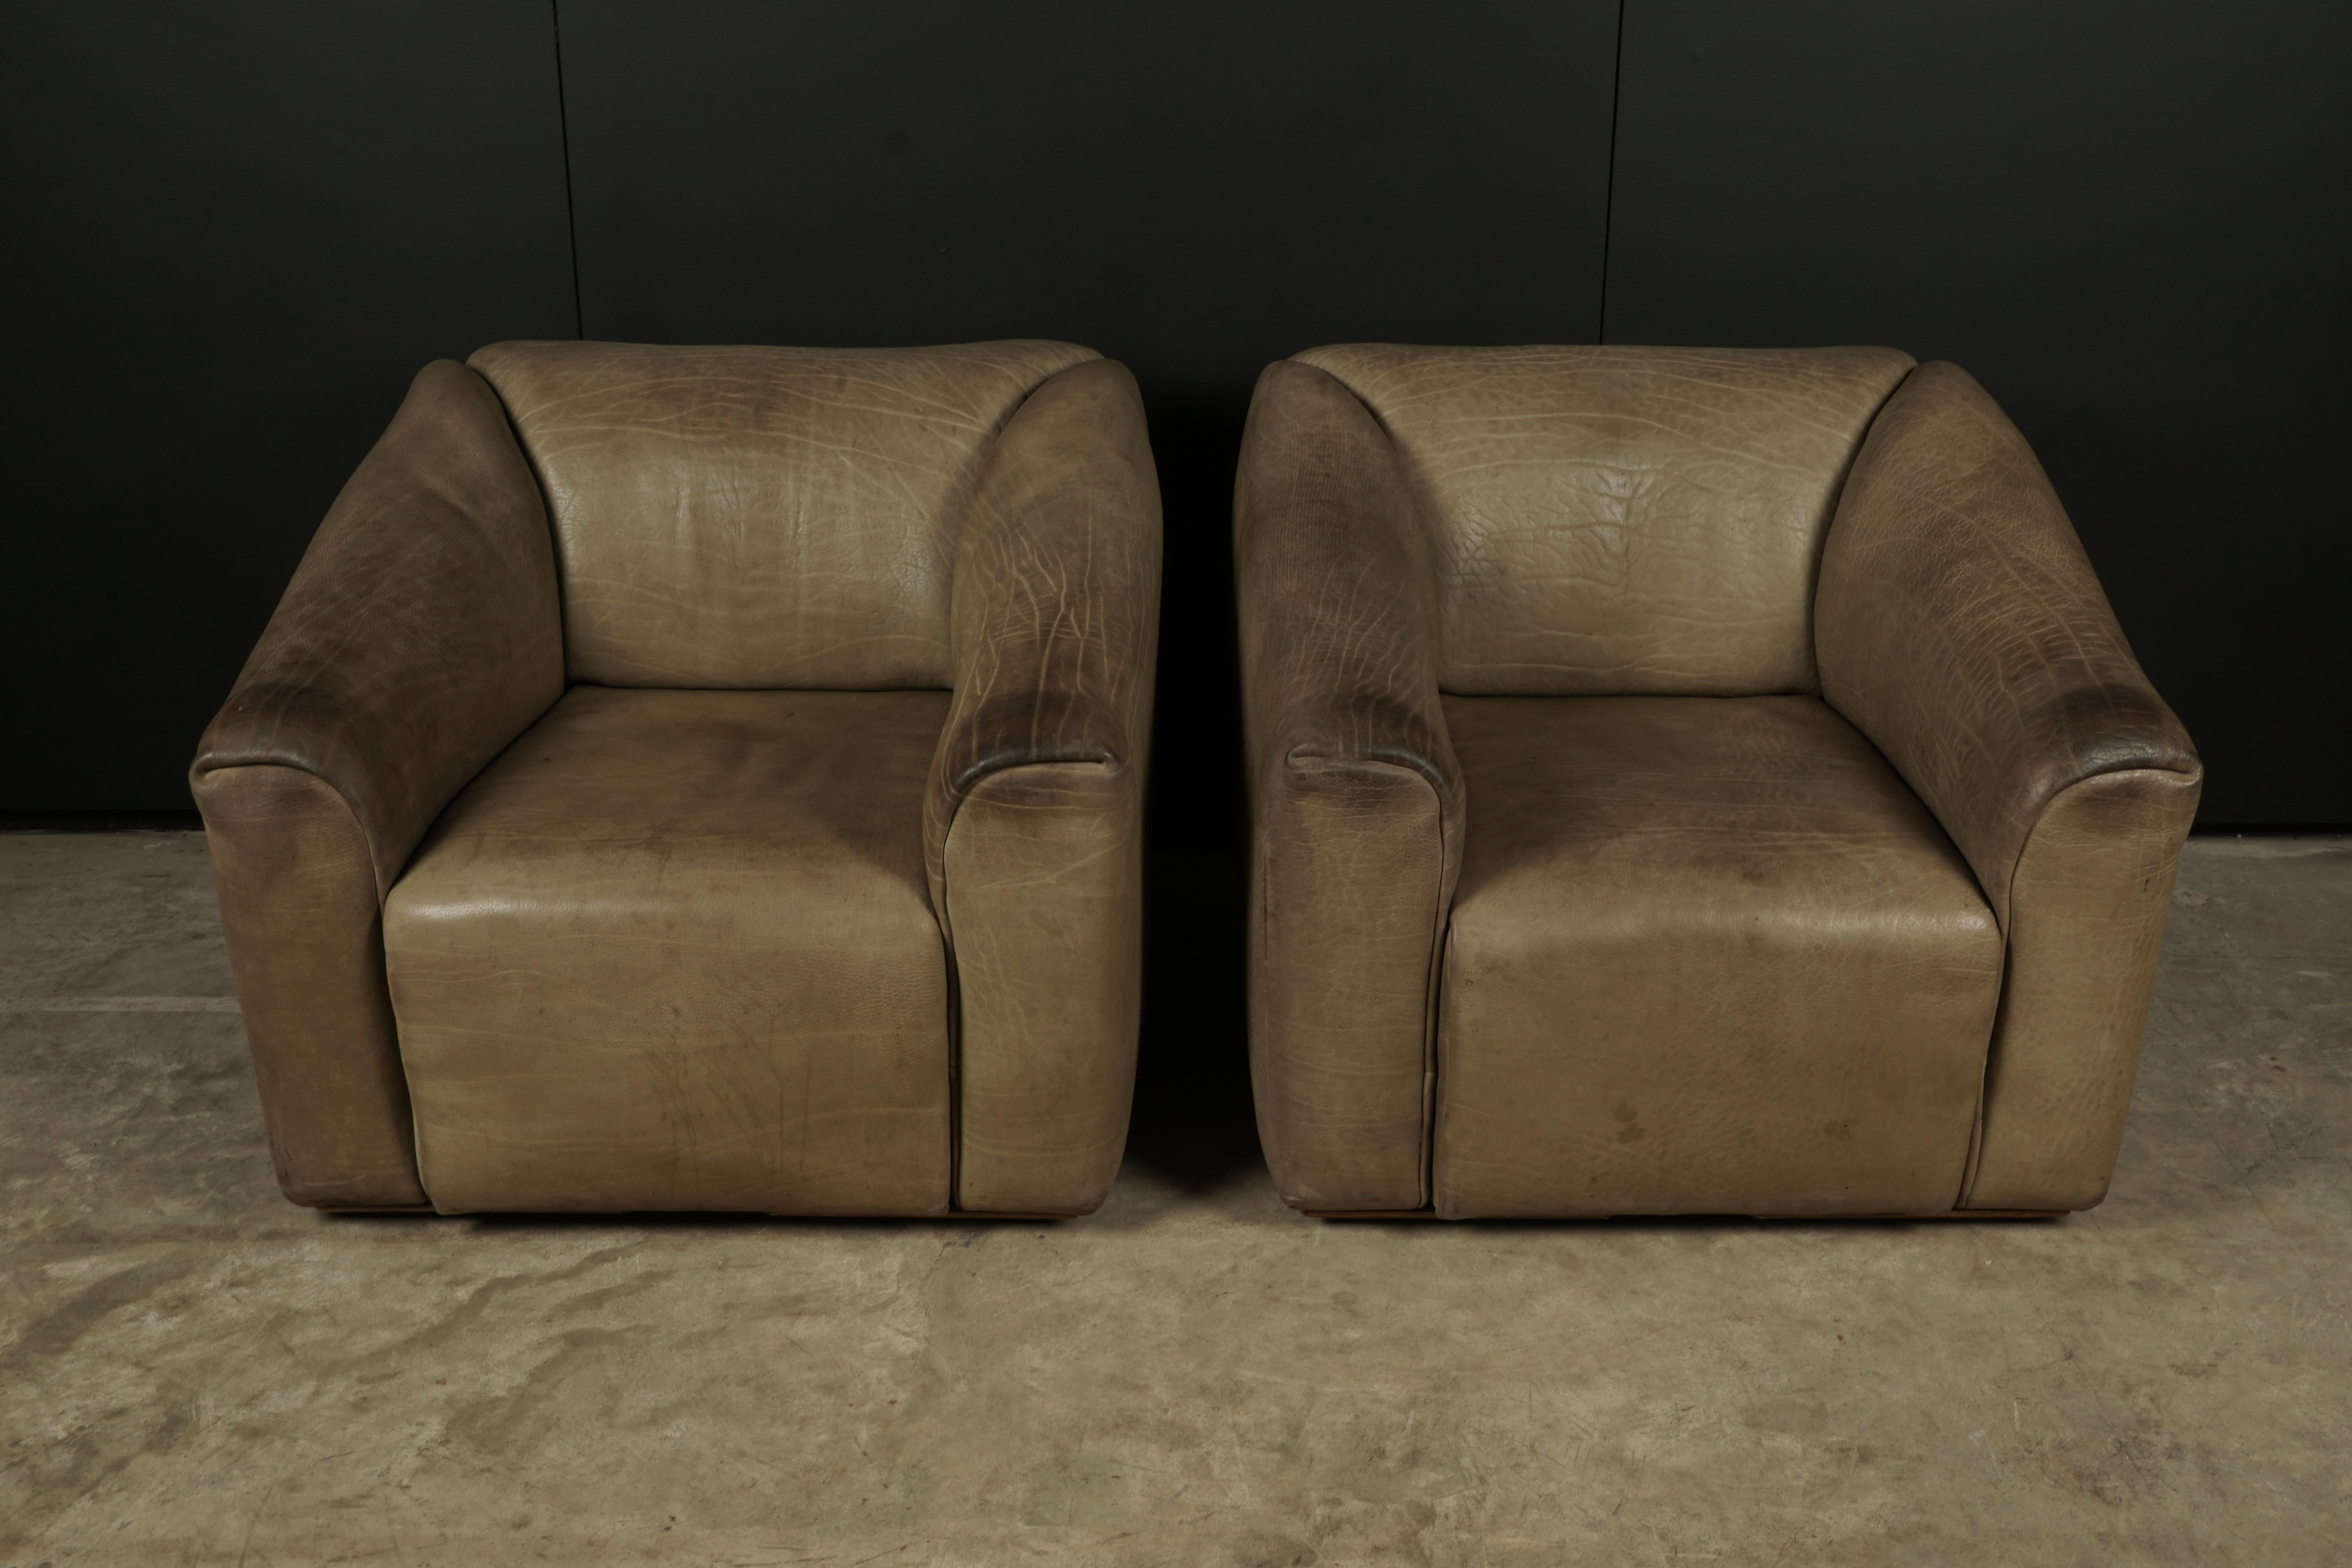 Rare vintage pair of De Sede DS 47 leather armchairs, Switzerland, 1970s. Upholstered in thick natural buffalo neck leather, with fantastic wear and patina. The seats extend six additional inches for more comfort.